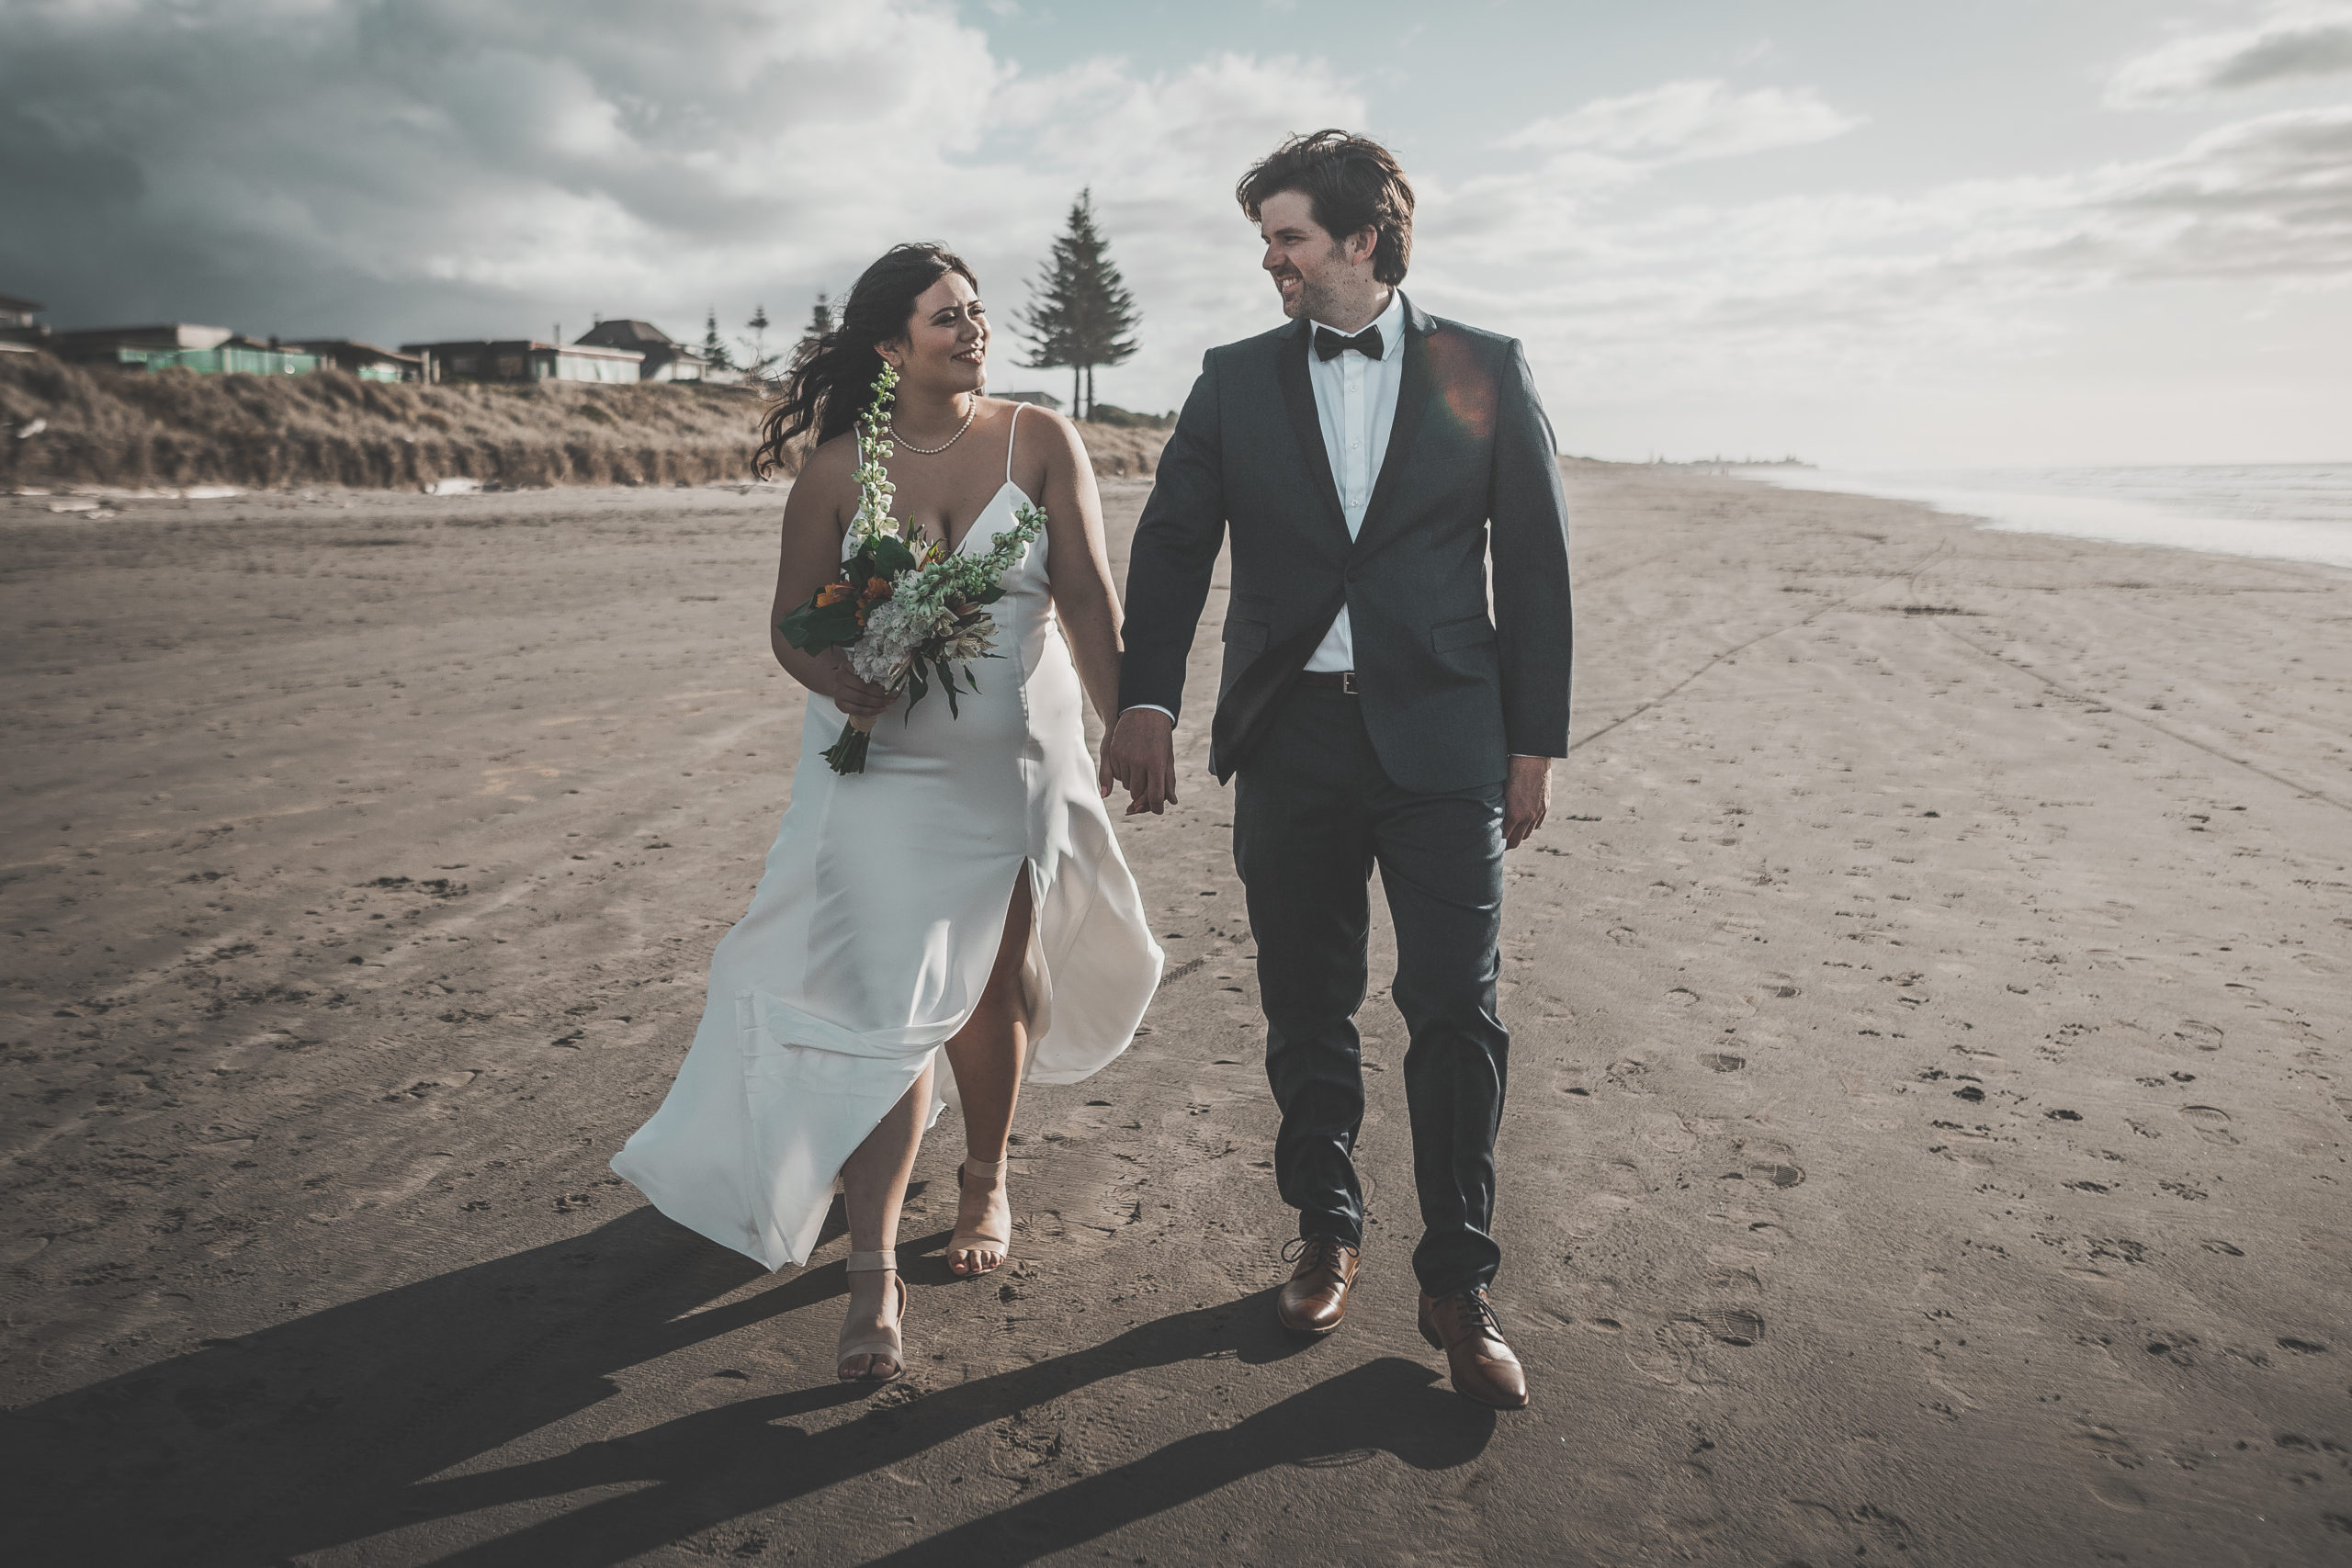 Wedding couple walking down a beach looking happily at one another